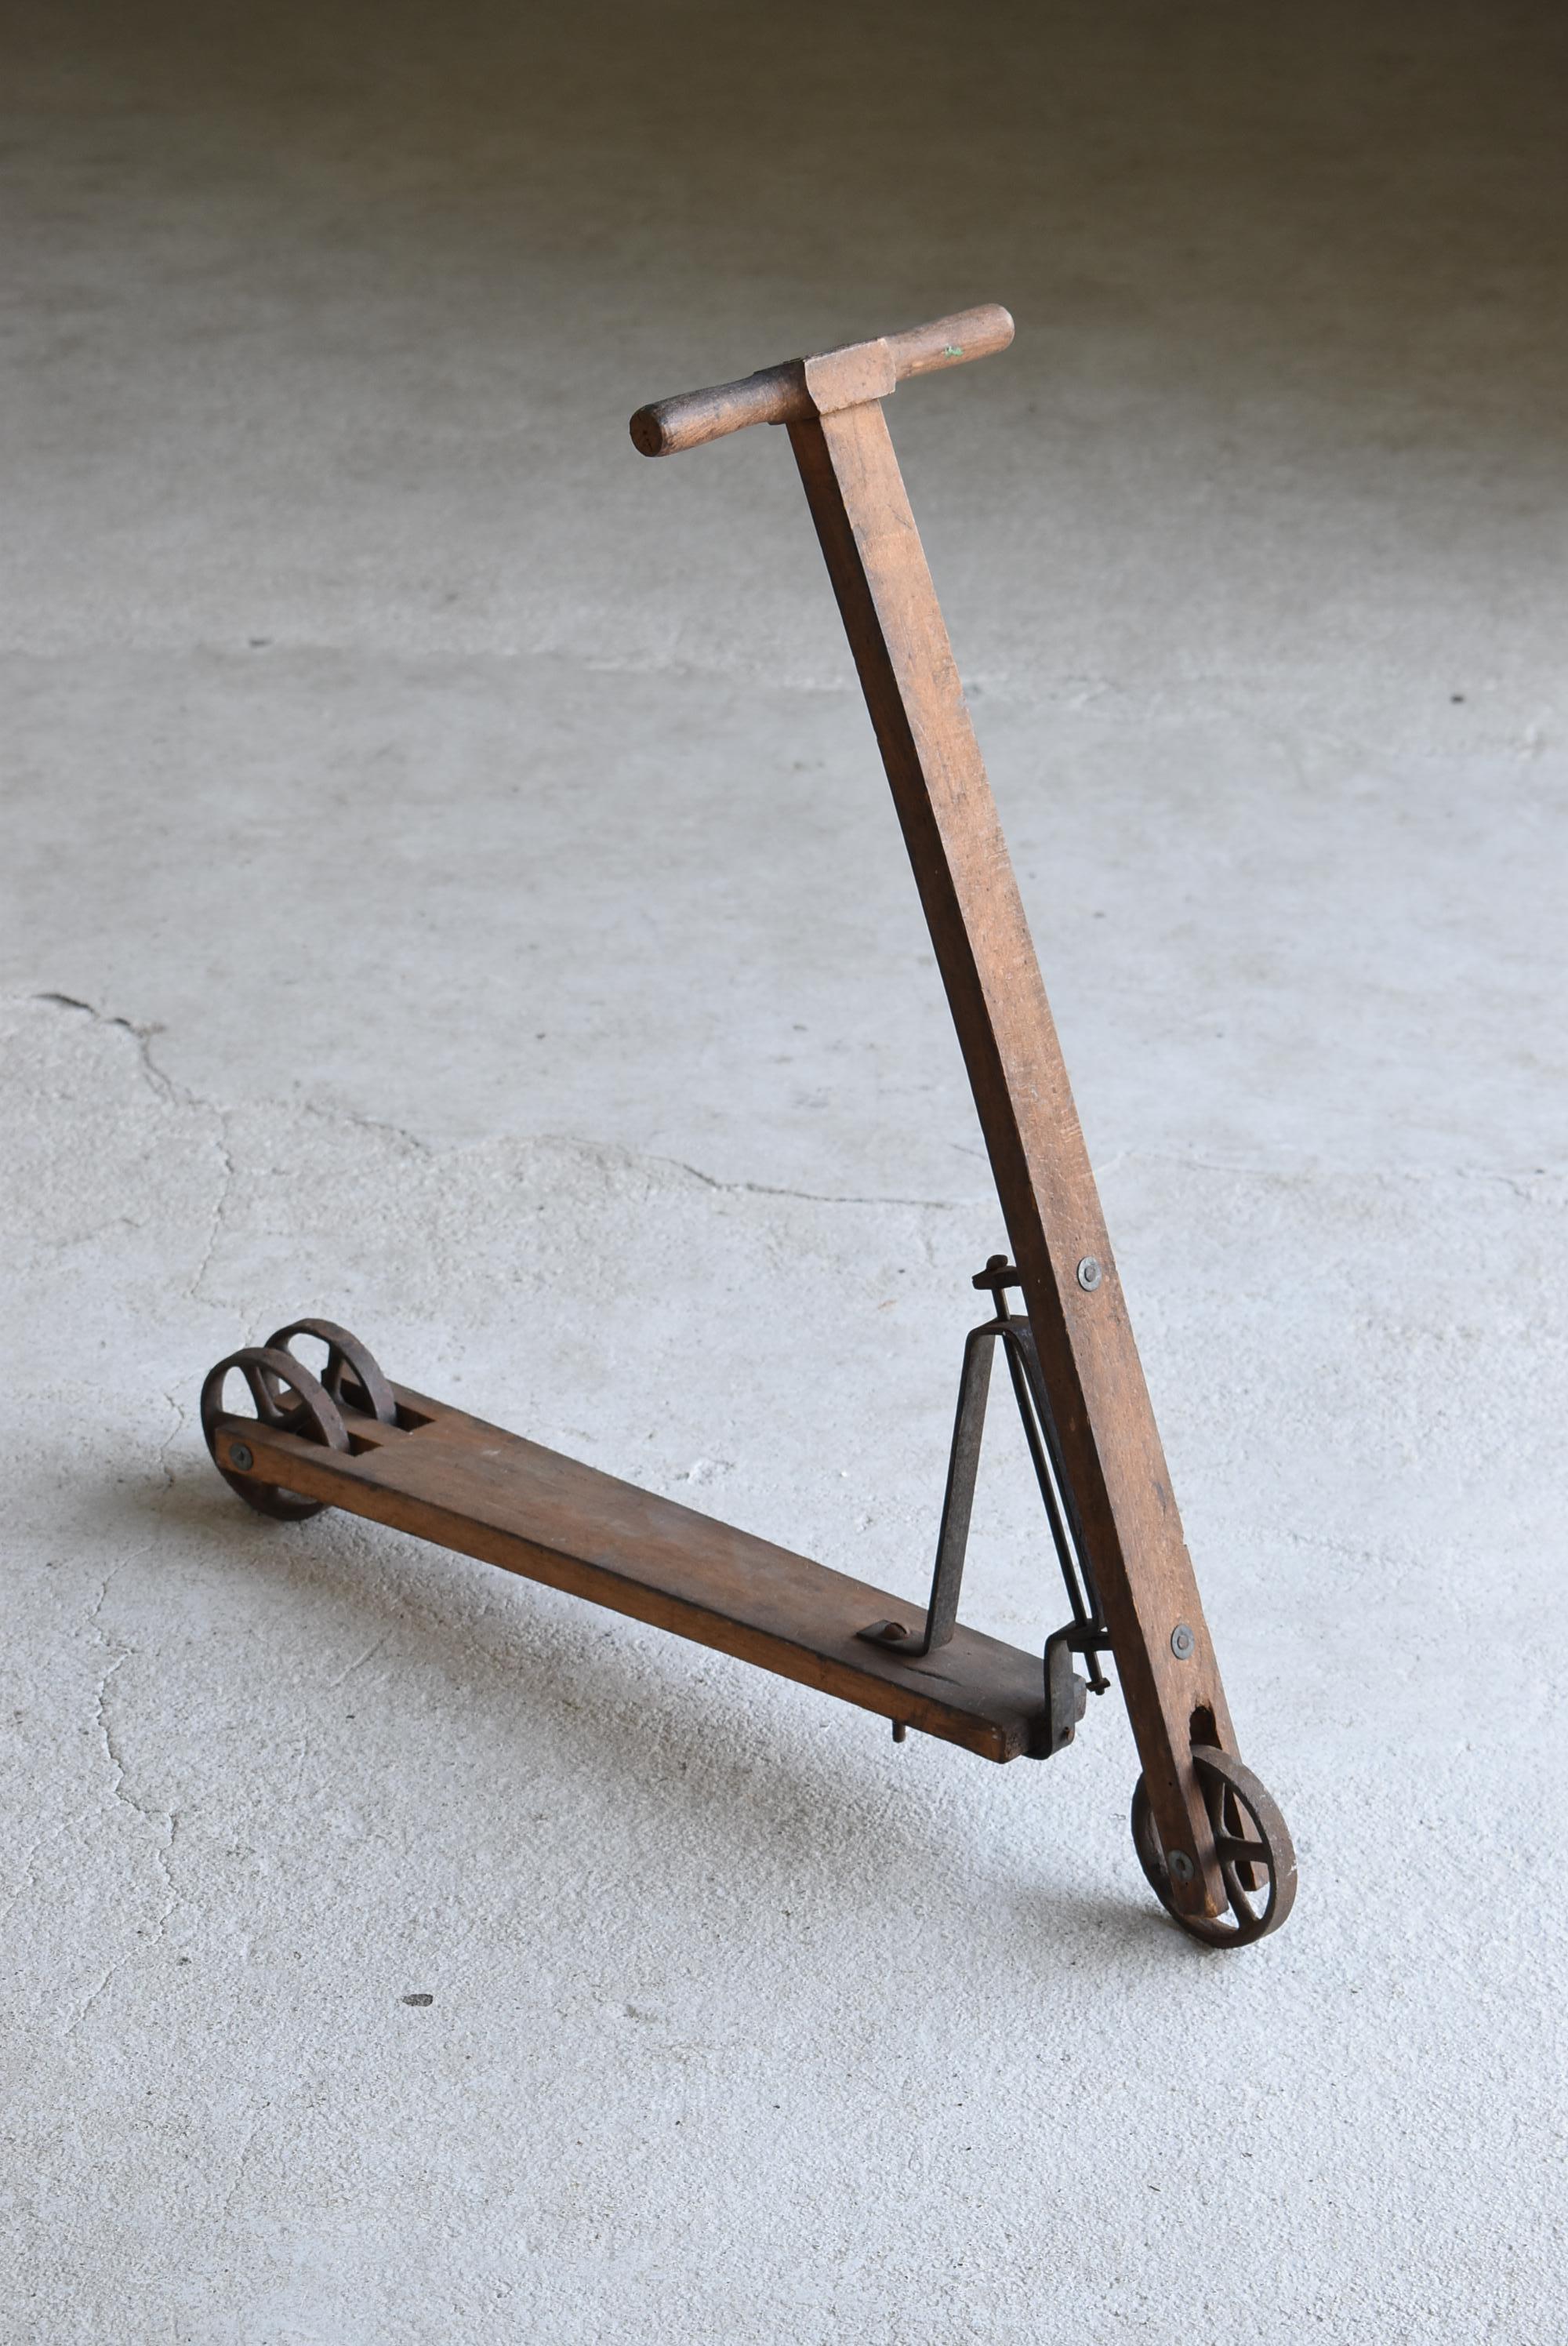 This is an old Japanese kick scooter.
It is from the early Showa period. (1900s-1920s).
It is made of wood and iron.

It has been carefully used for many years and remains here today.
This is a miracle.

Please enjoy it as an object of art.
We